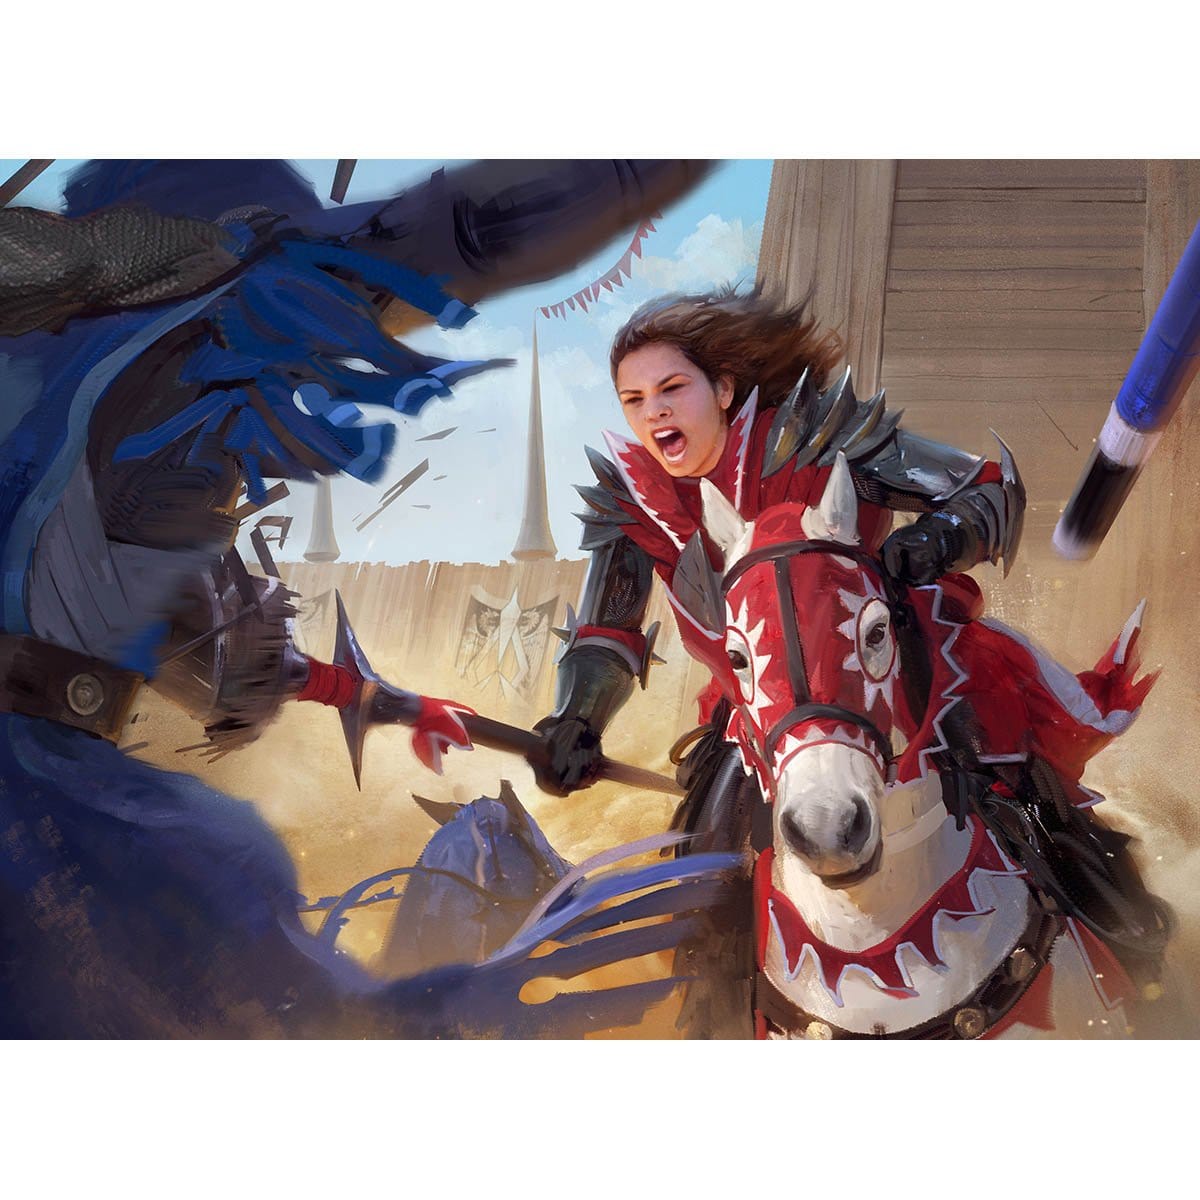 Joust Print - Print - Original Magic Art - Accessories for Magic the Gathering and other card games